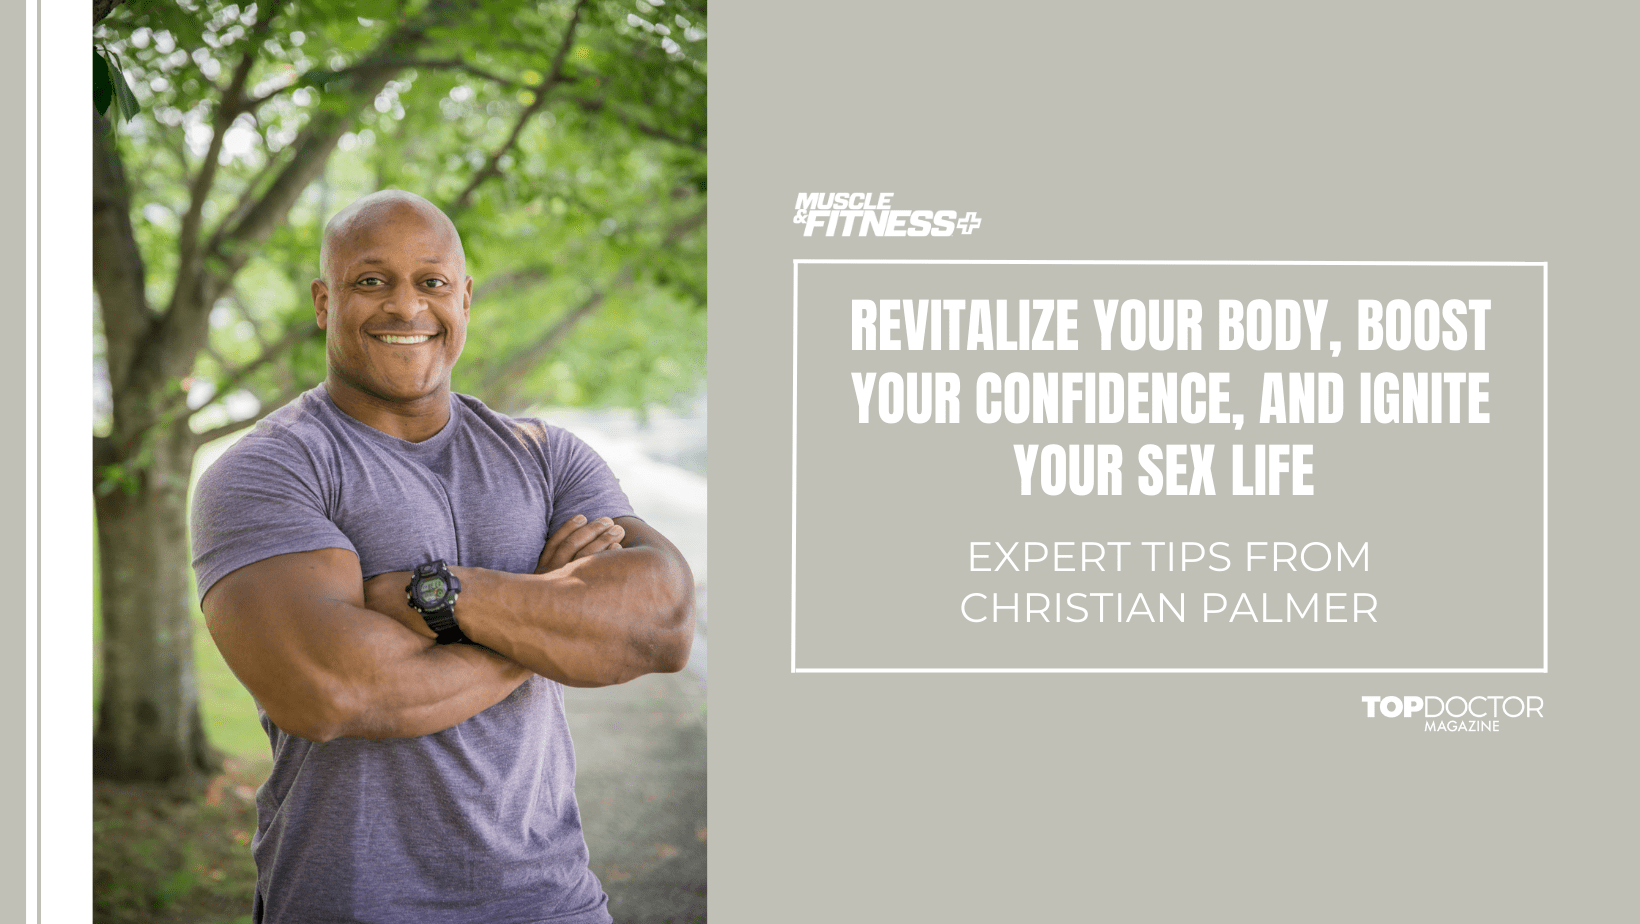 Revitalize Your Body, Boost Your Confidence, and Ignite Your Sex Life with These Expert Tips